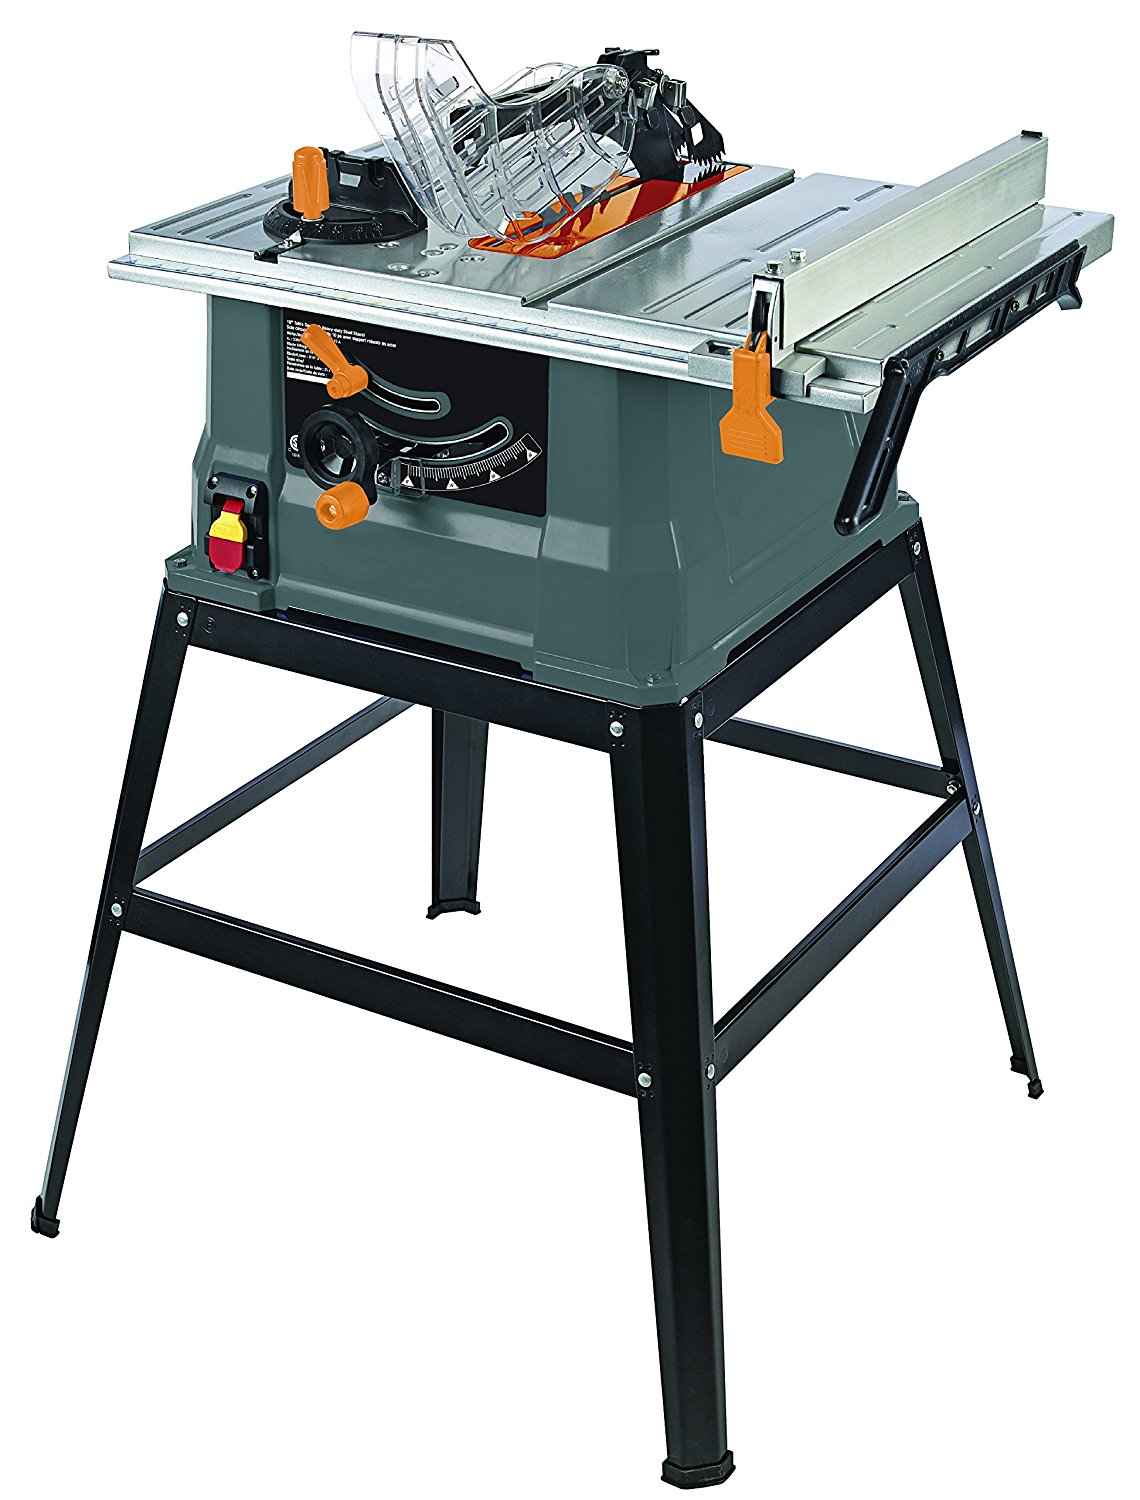 TruePower 10-Inch 15Amp Table Saw W/ Steel Stand - image 1 of 2